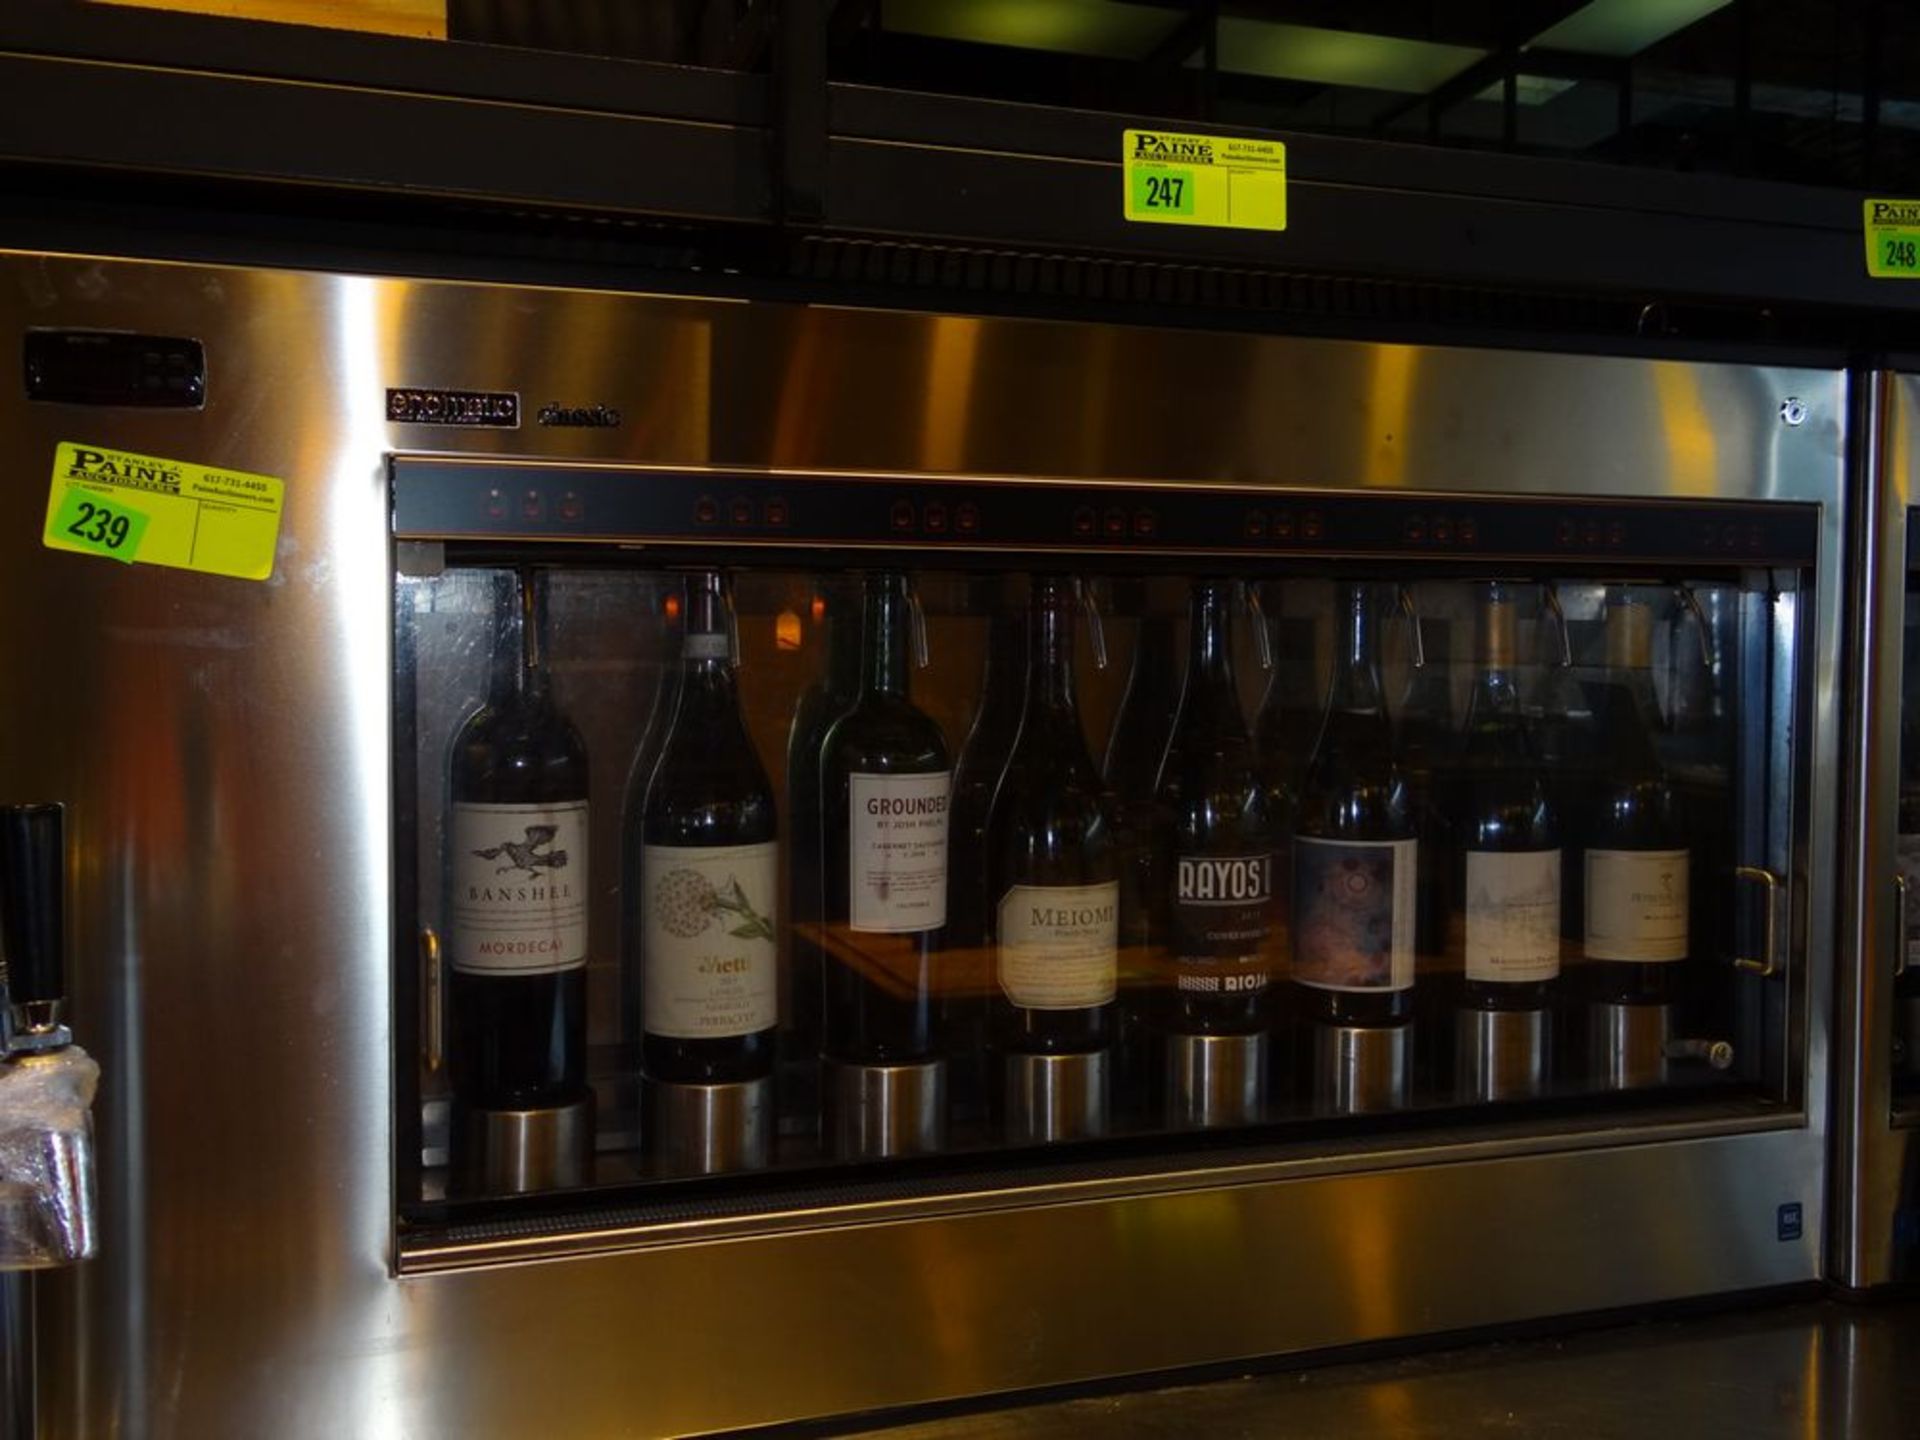 (1) Enomatic Wine Serving System